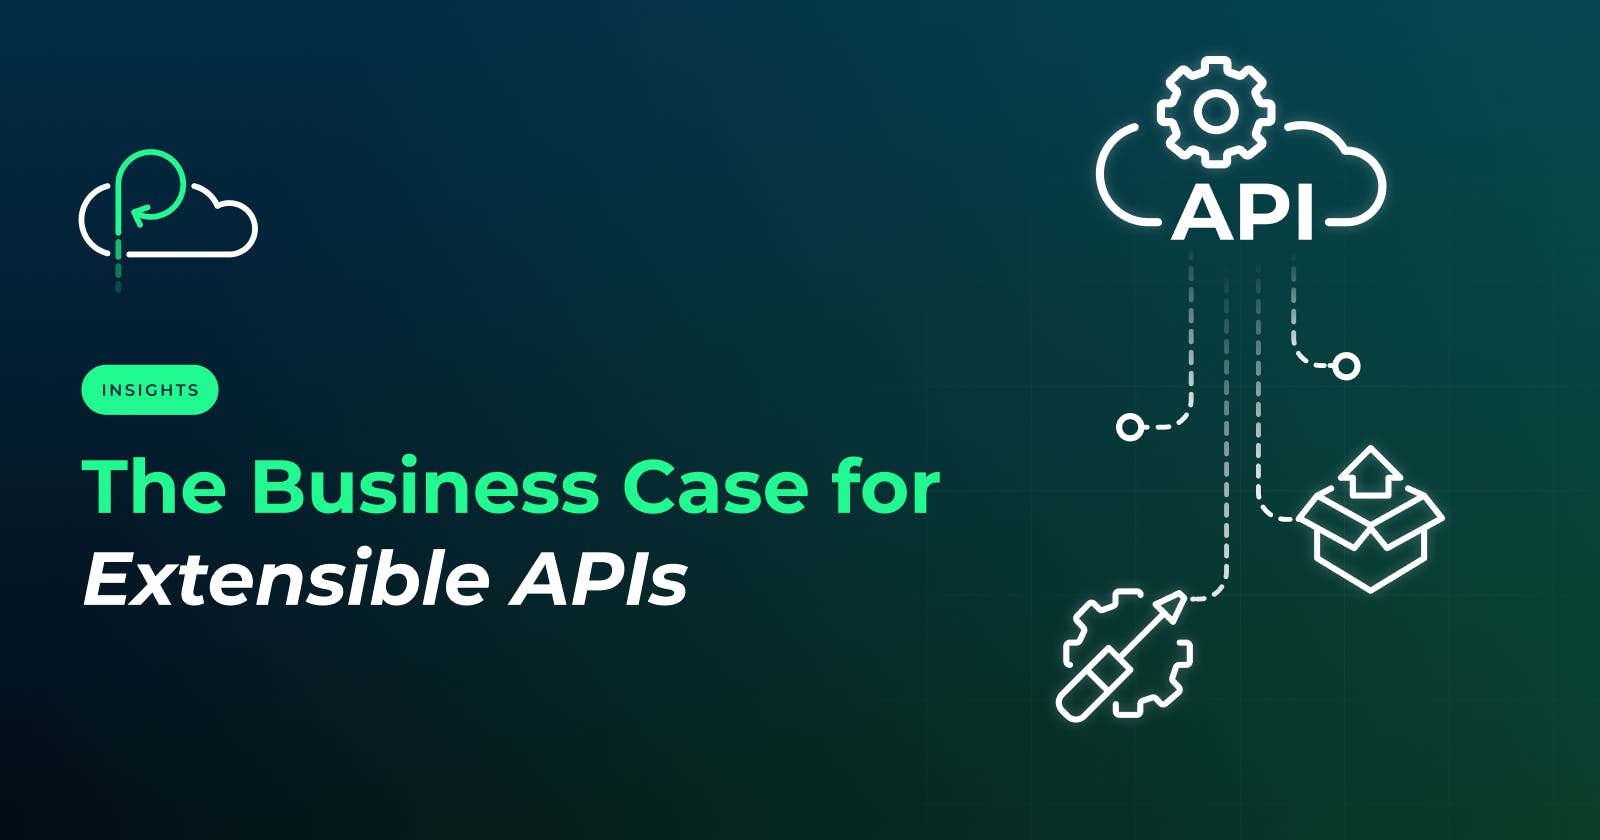 The Business Case for Extensible APIs